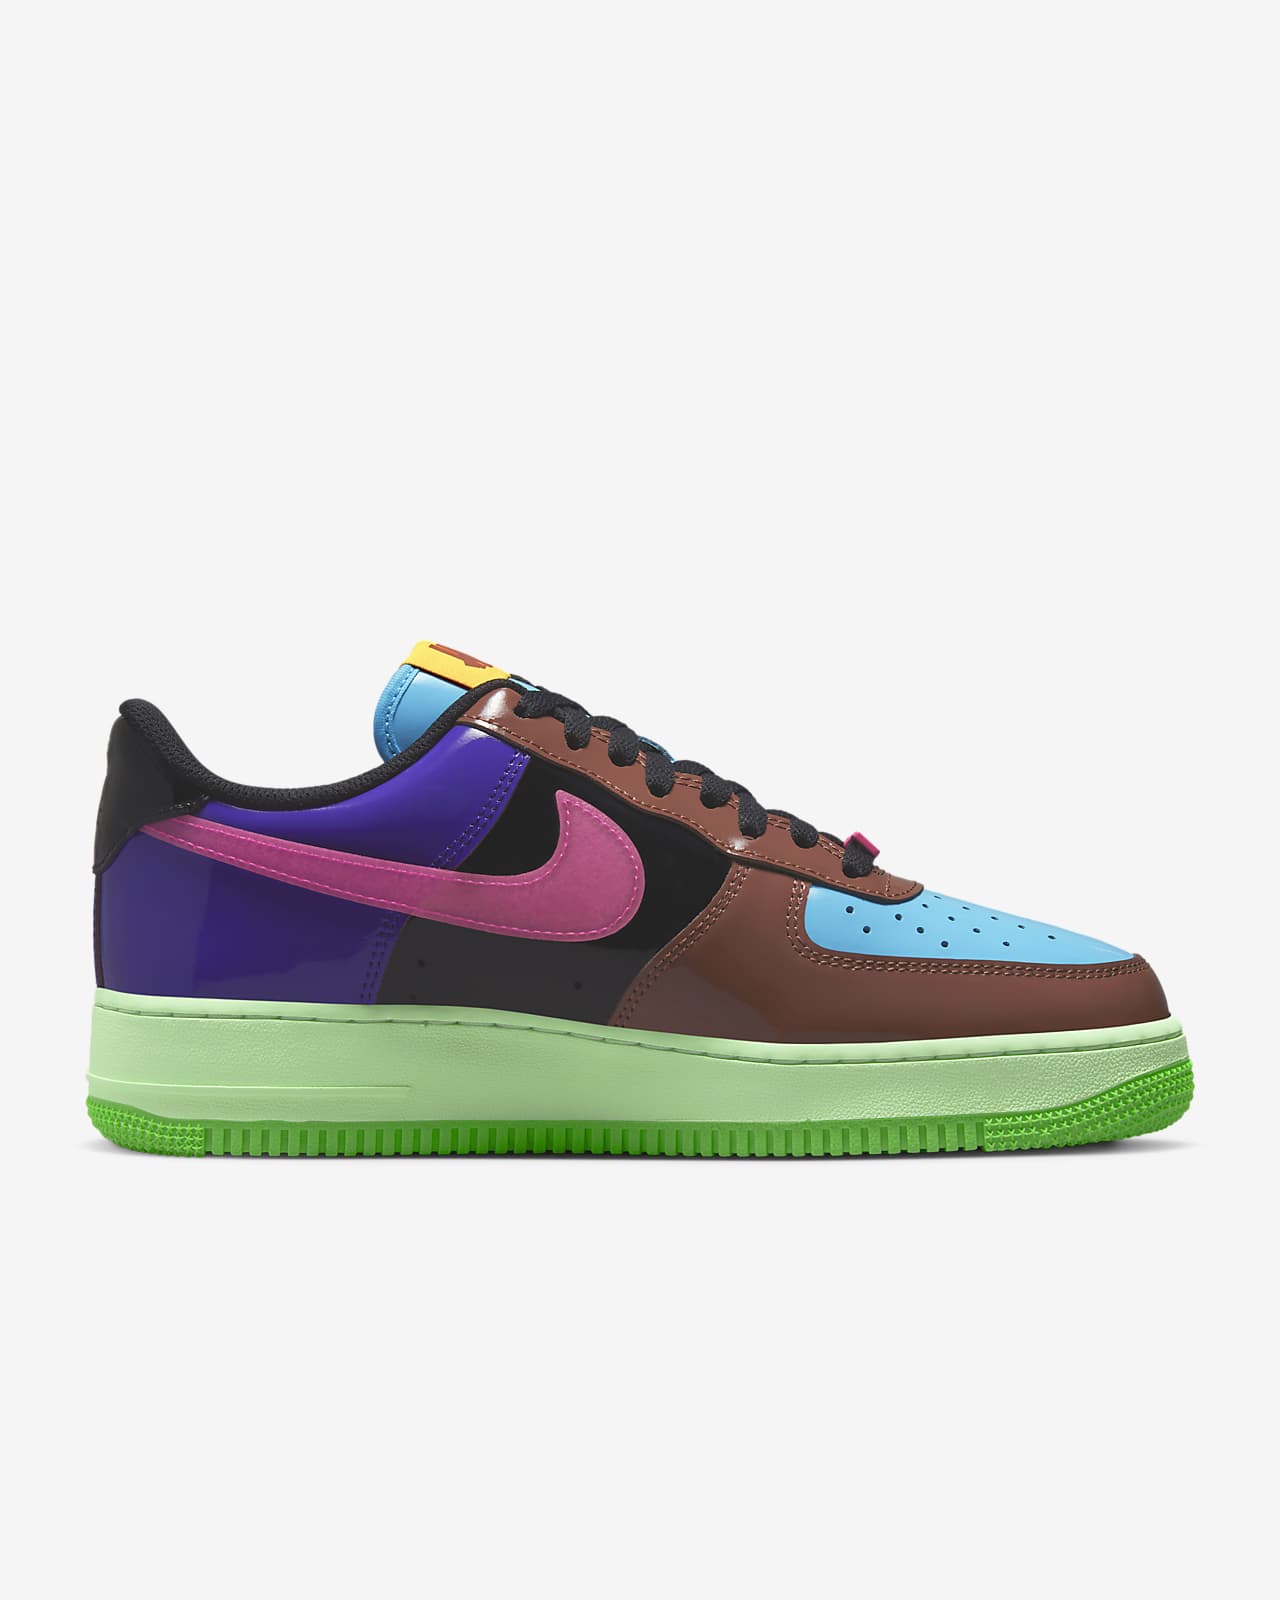 Nike Air Force 1 Low x UNDEFEATED Men's Shoes